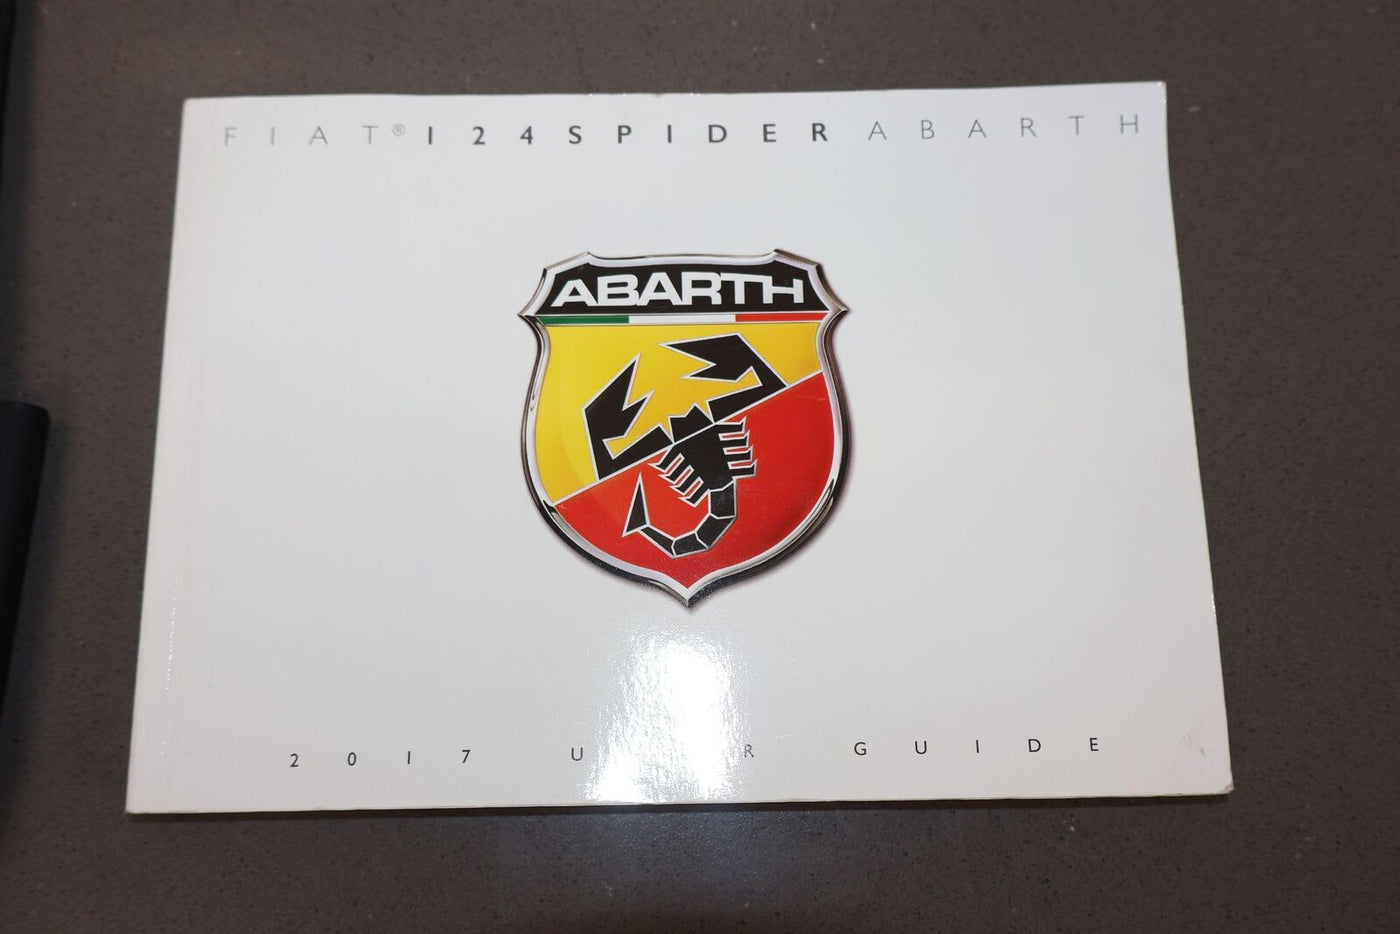 2017 Fiat 124 Spider Alaborazione Abarth OEM Owners Manual W/ Leather Pouch